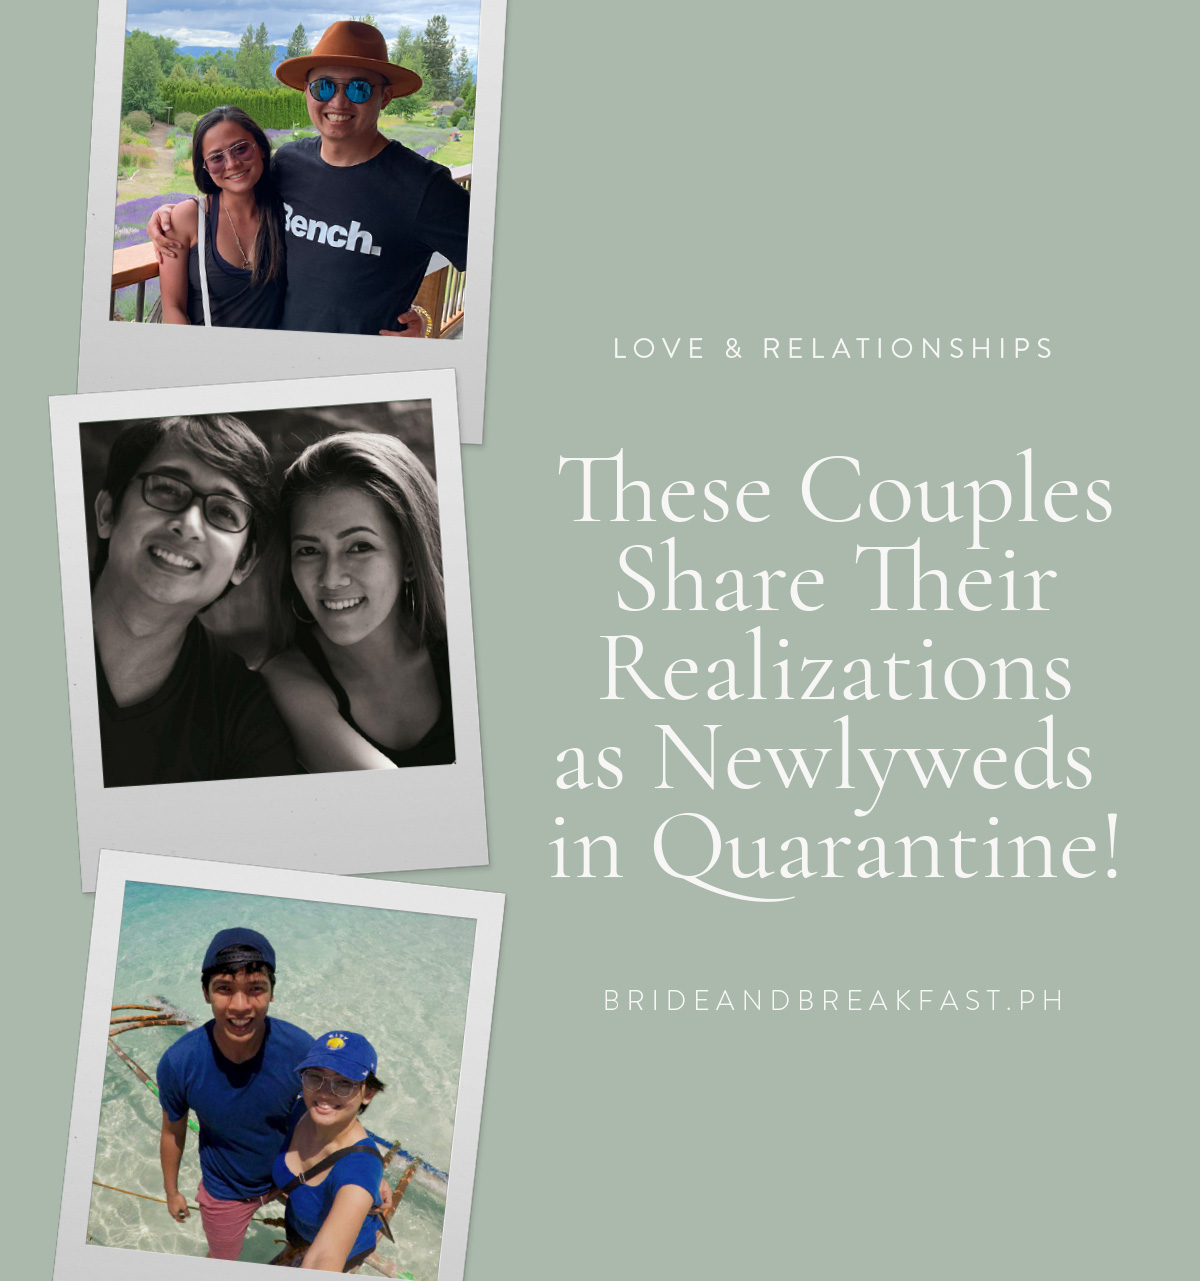 These Couples Share their Realizations as Newlyweds in Quarantine!